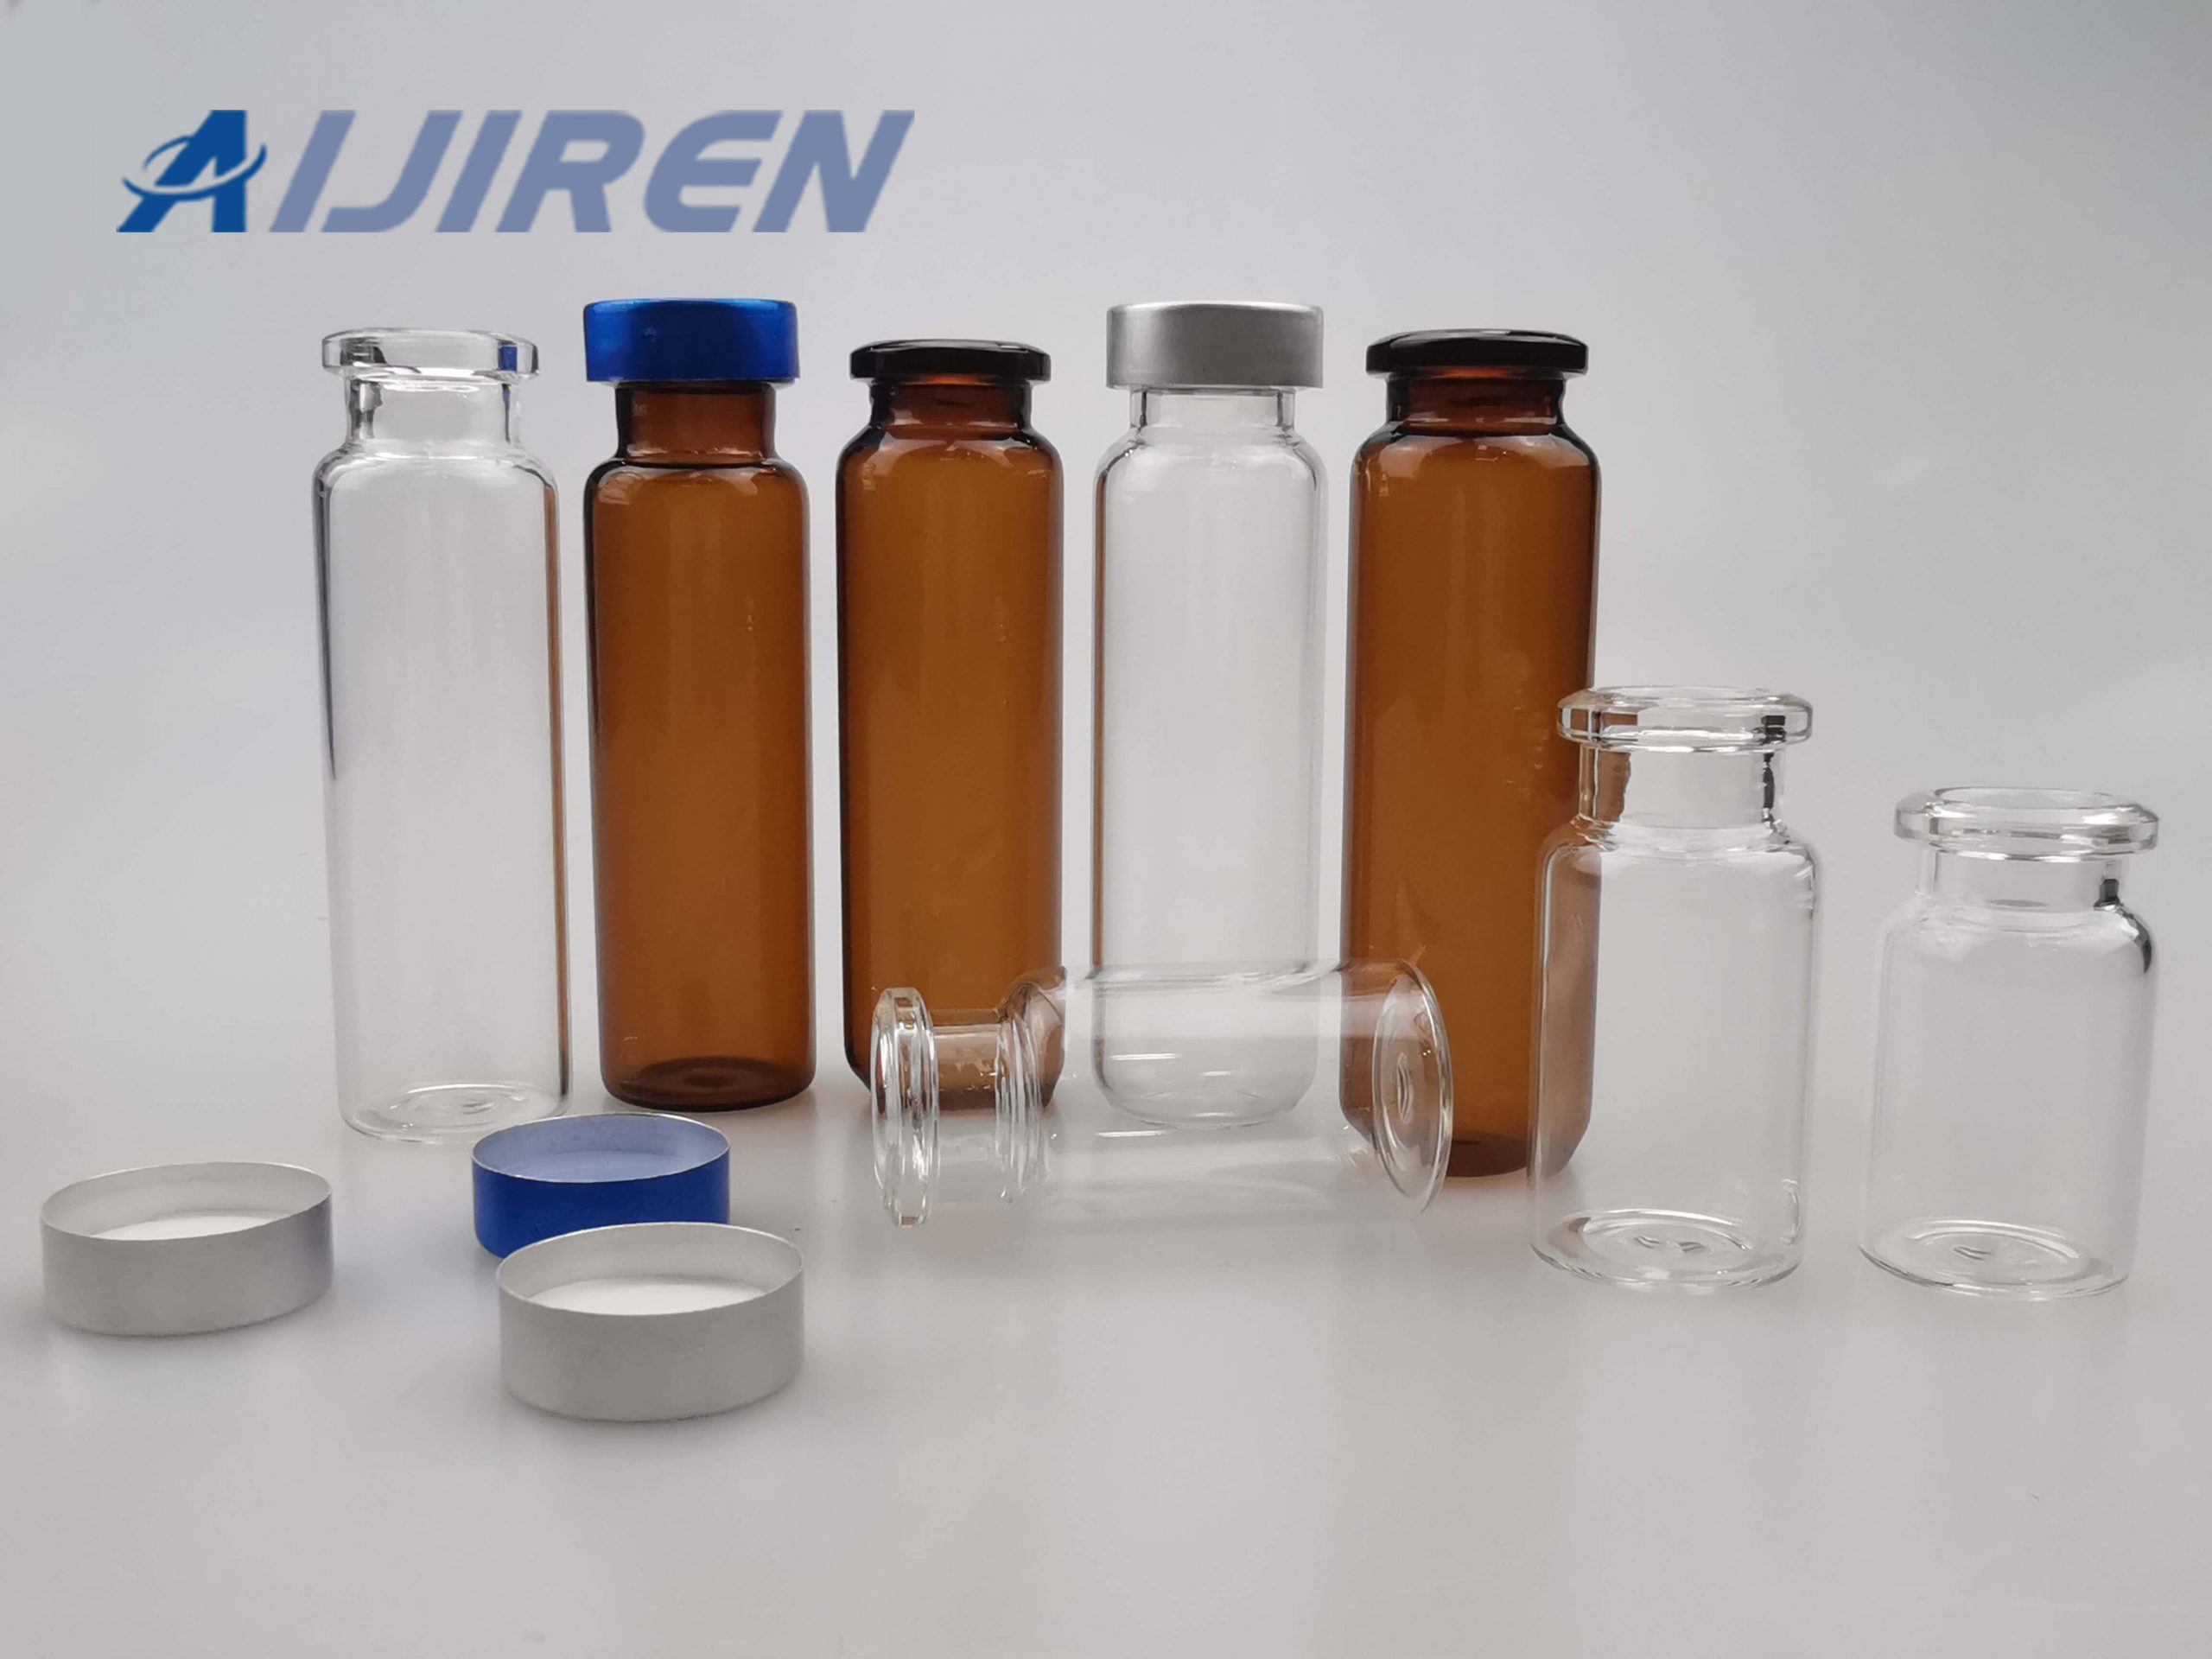 Factory Directly Supply 20mm Crimp Top Headspace Vials from Aijiren